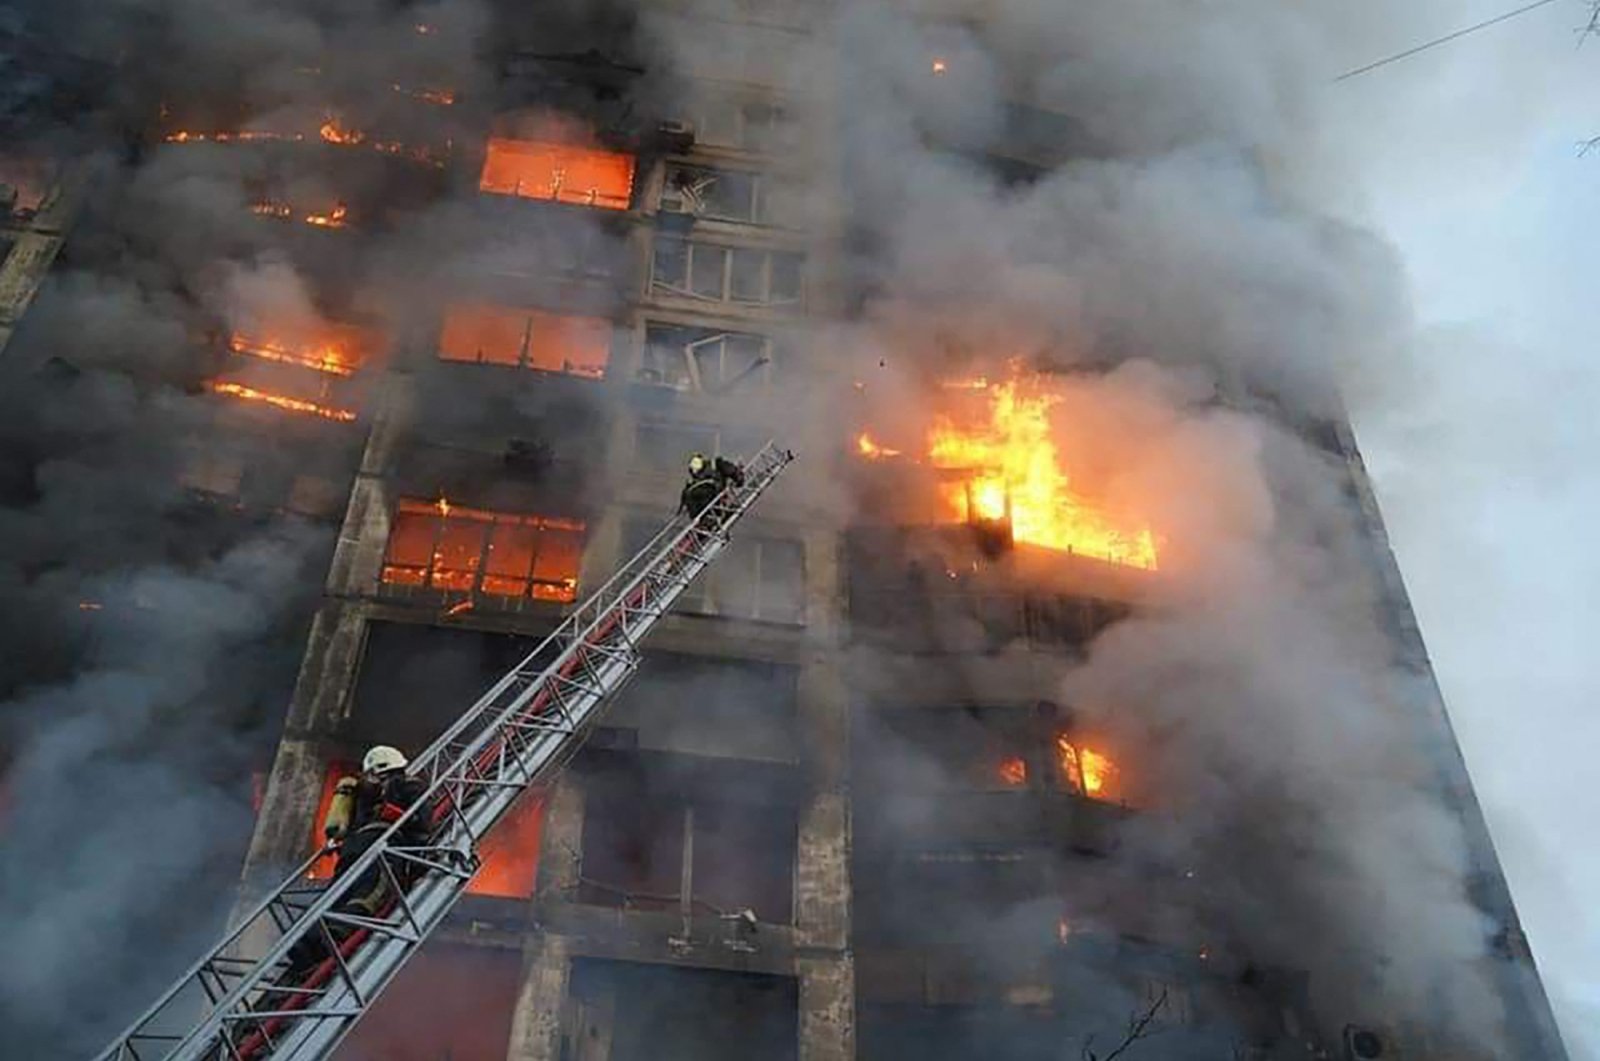 Firefighters work to extinguish a fire in a housing block hit by shelling in the Sviatoshynskyi district in western Kyiv, Ukraine, March 15, 2022. (State Emergency Service of Ukraine Handout Photo via AFP)